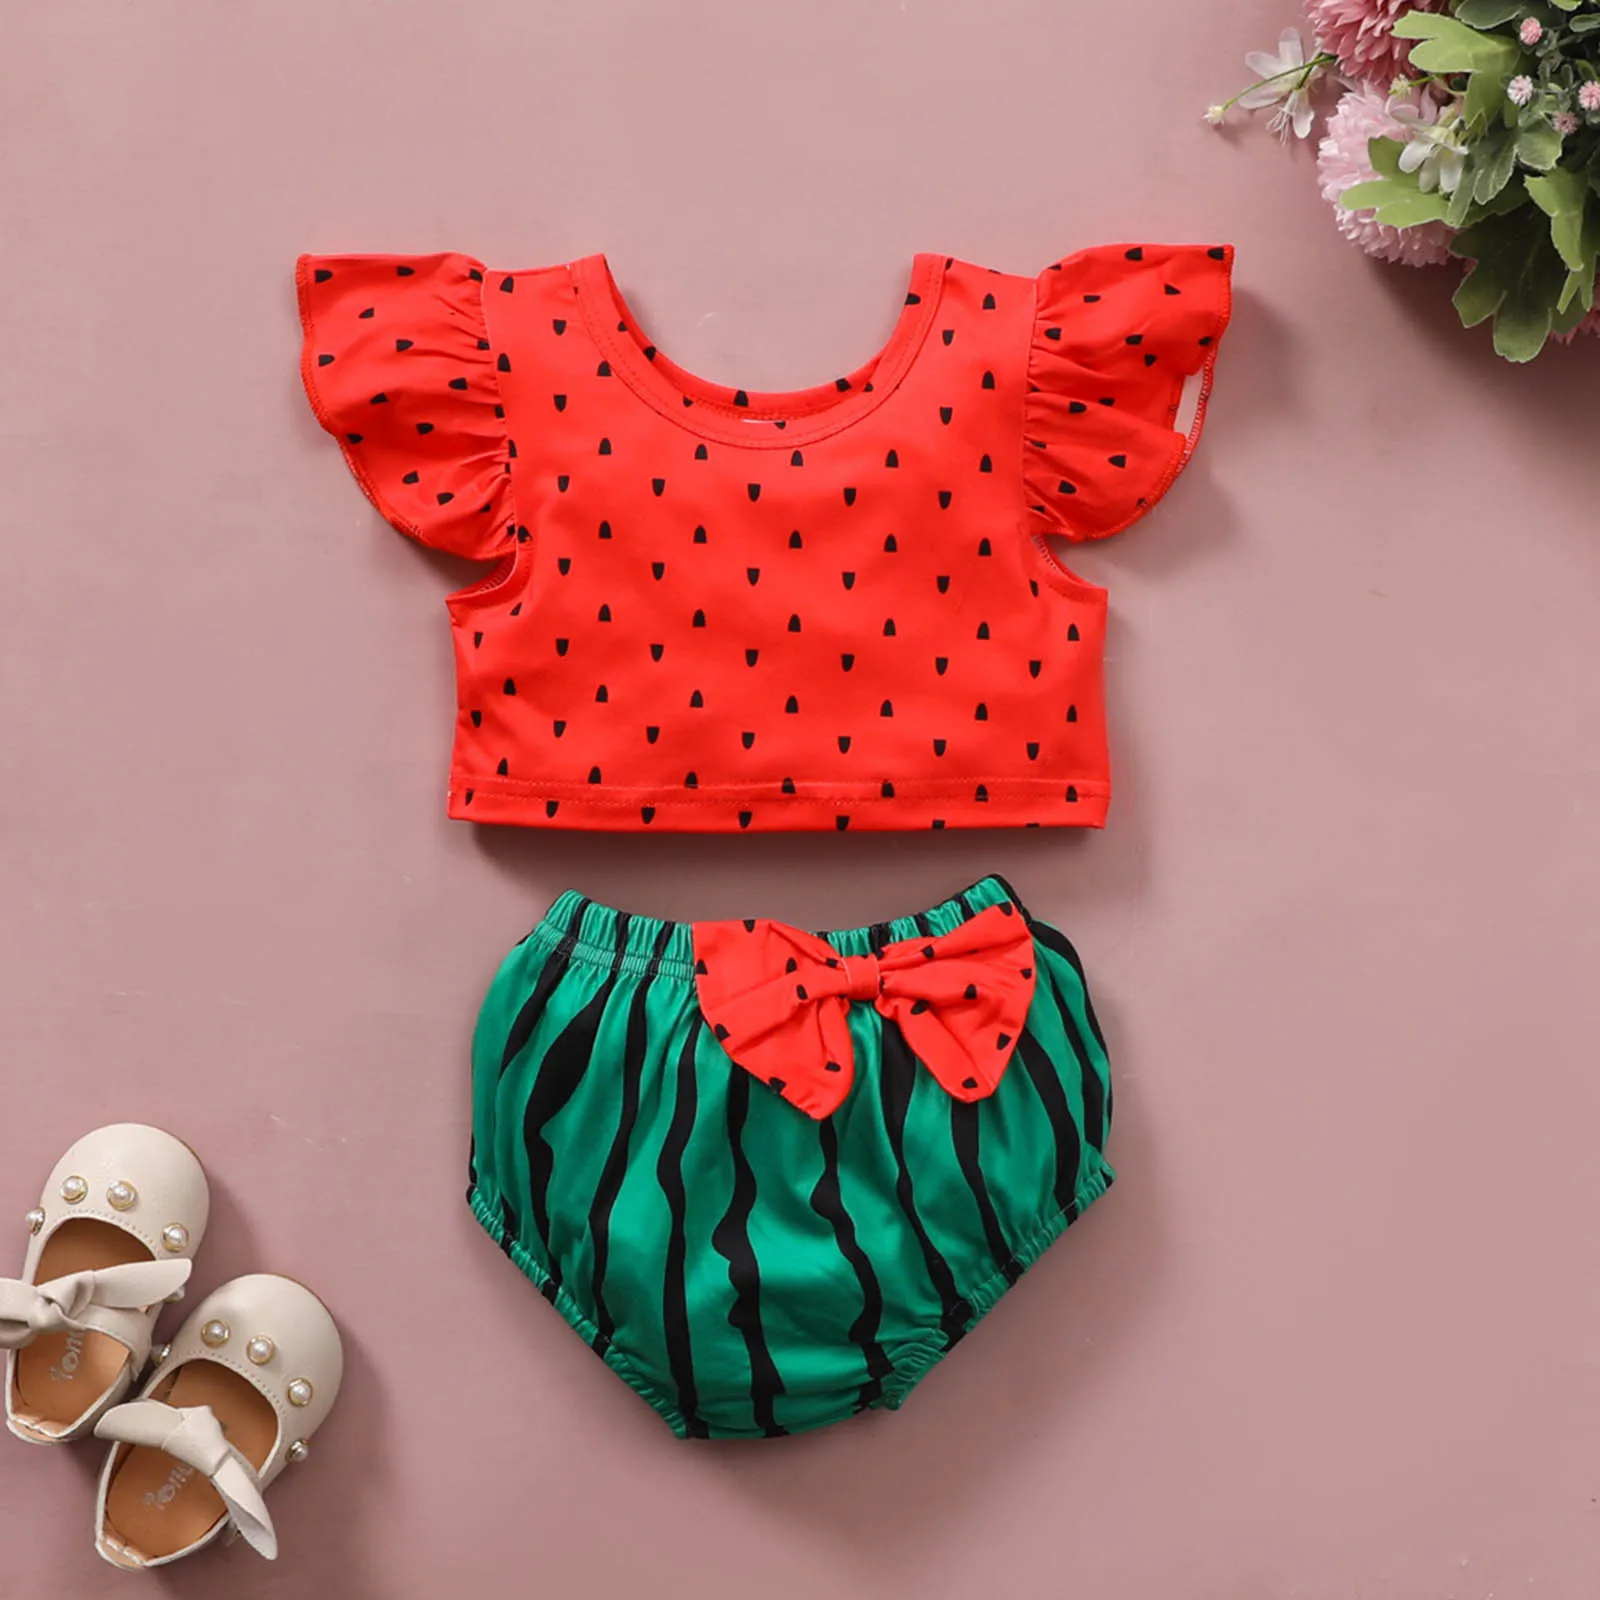 

Toddler Girls Summer Clothes Sets Watermelon Fruit Prints Sleeveless Tops Vest+Shorts 2Pcs Outfits Baby Clothes 3 6 12 24 Months